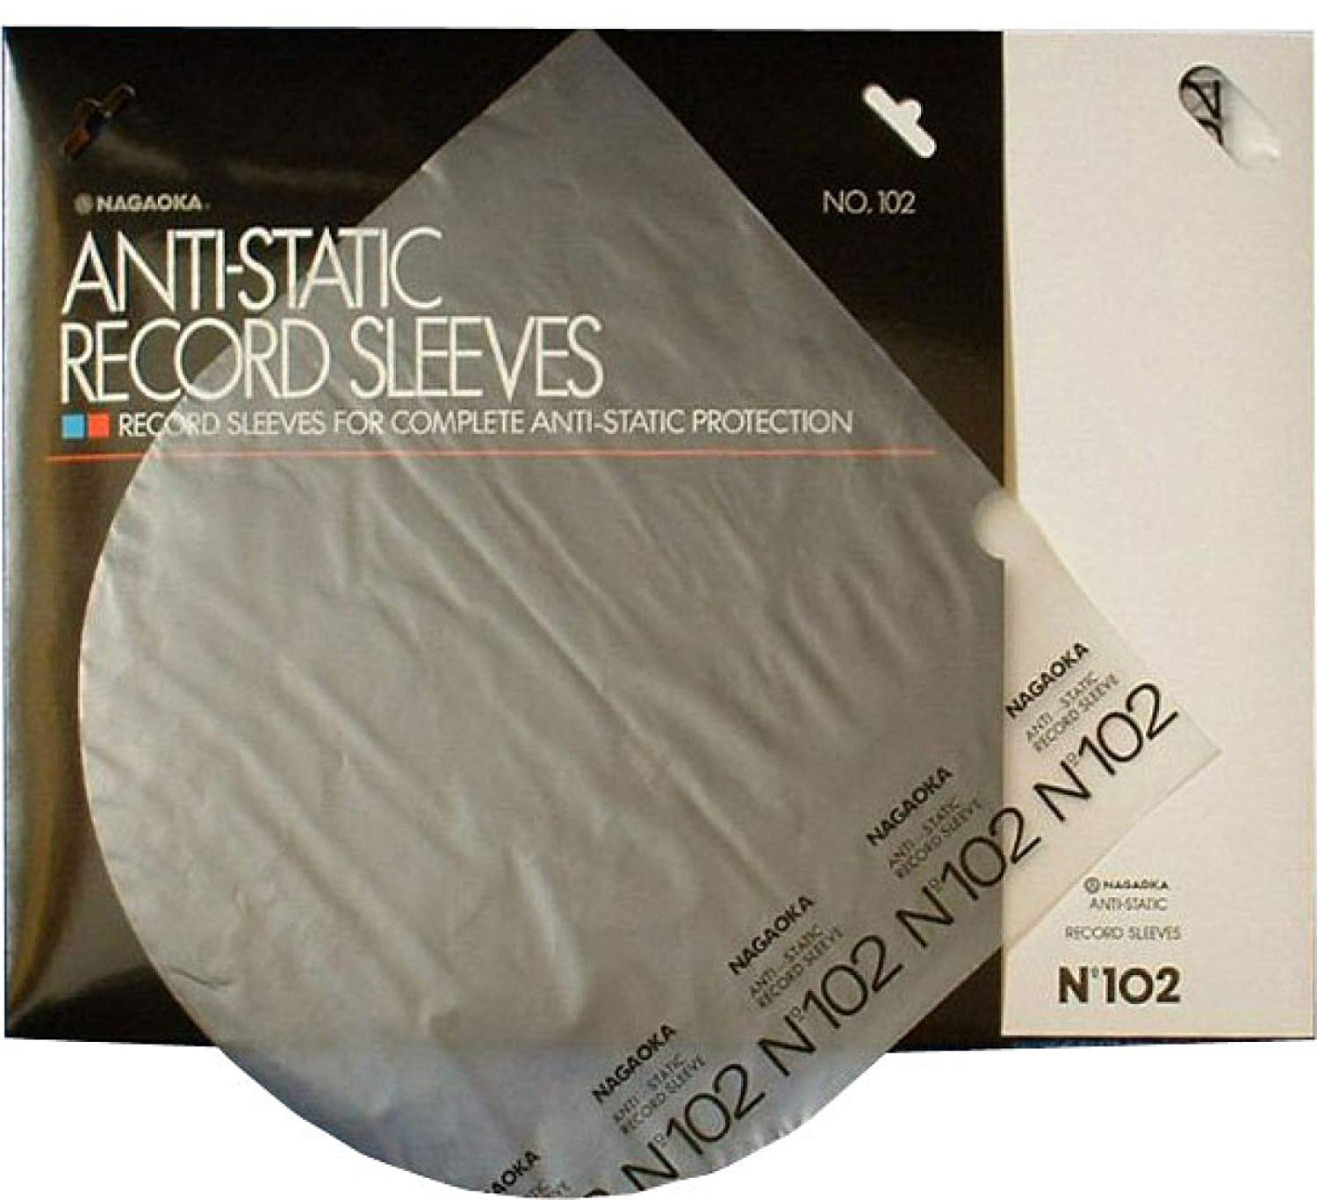 Antistatic Record Sleeves Discfile 102